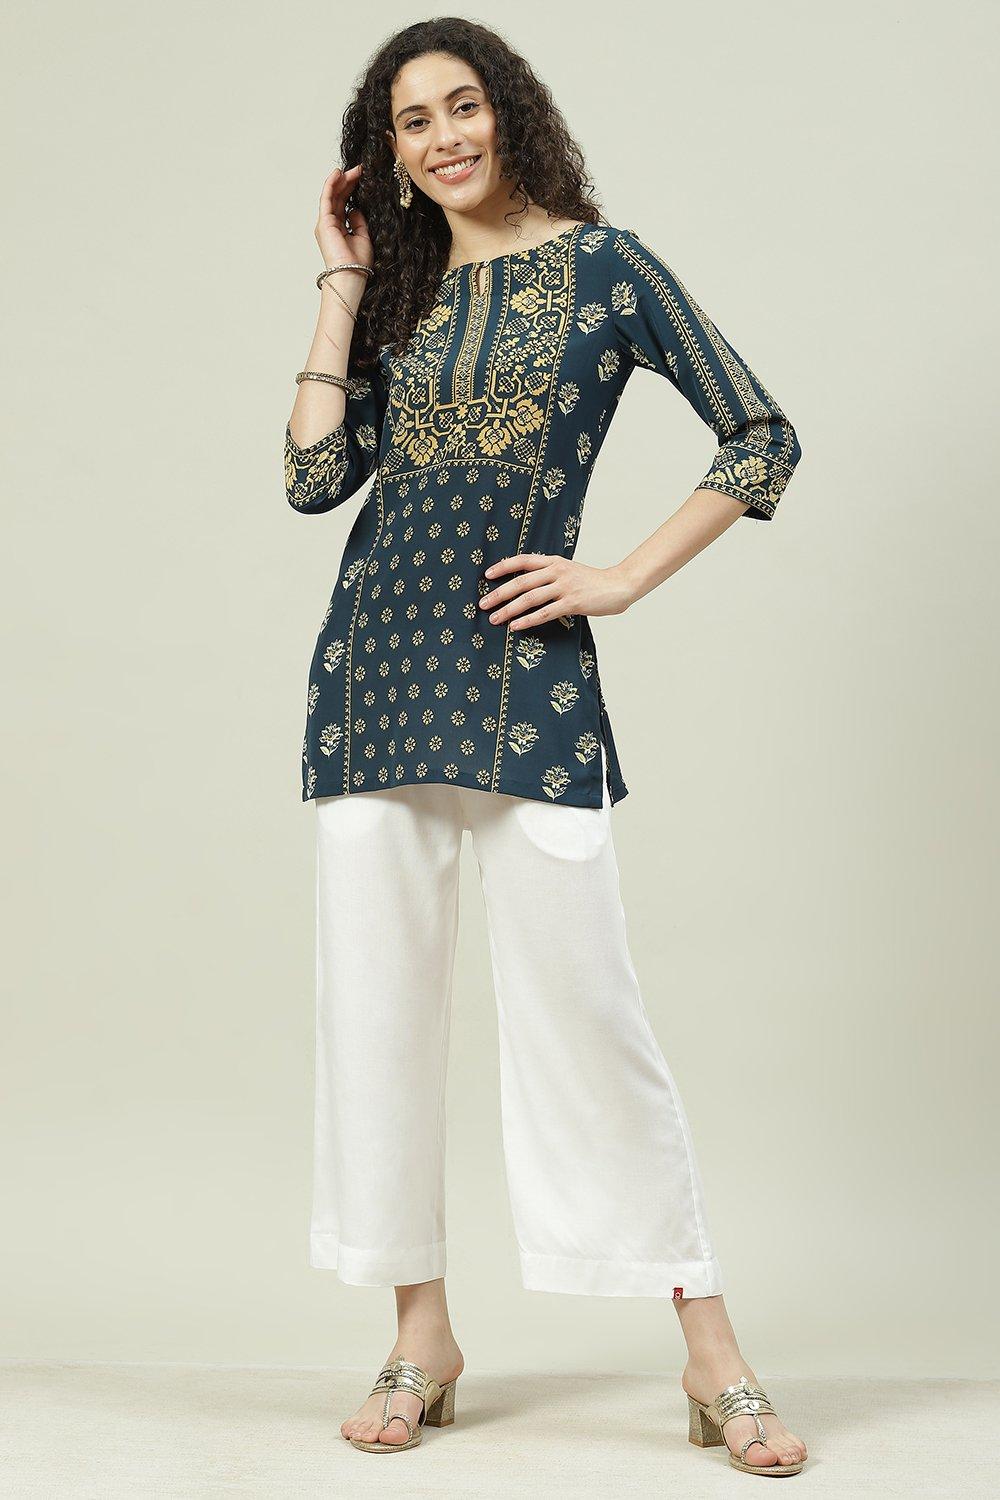 IVORY WHITE PALAZZO PANT SET WITH A MULTI COLOURED EMBROIDERED KURTA TOP  AND SILVER HIGHLIGHTS  Seasons India